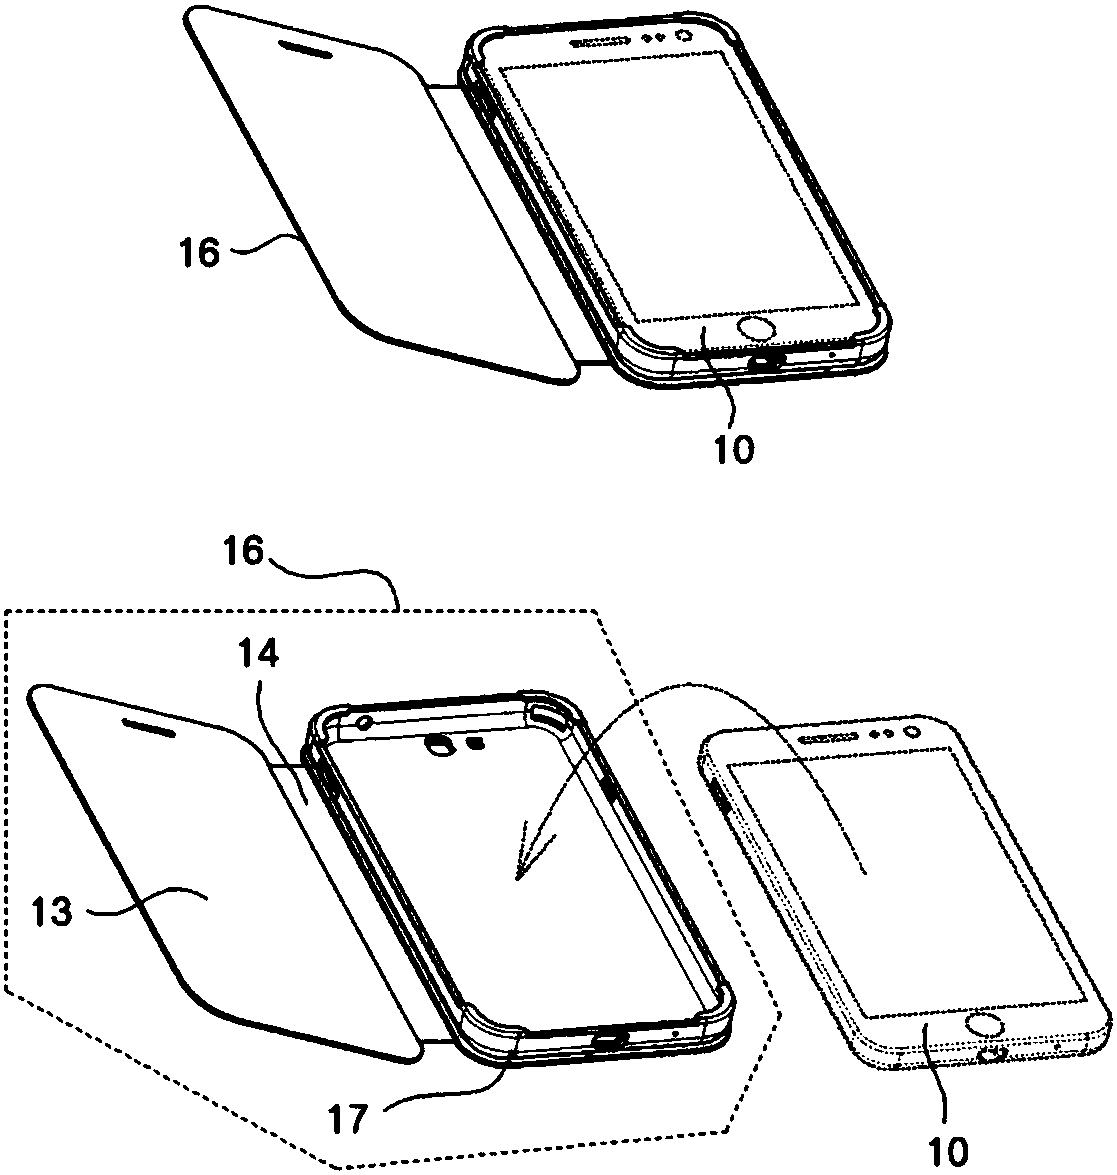 Improved protective case for out-folding image display device provided with flexible display device, and protective case application method